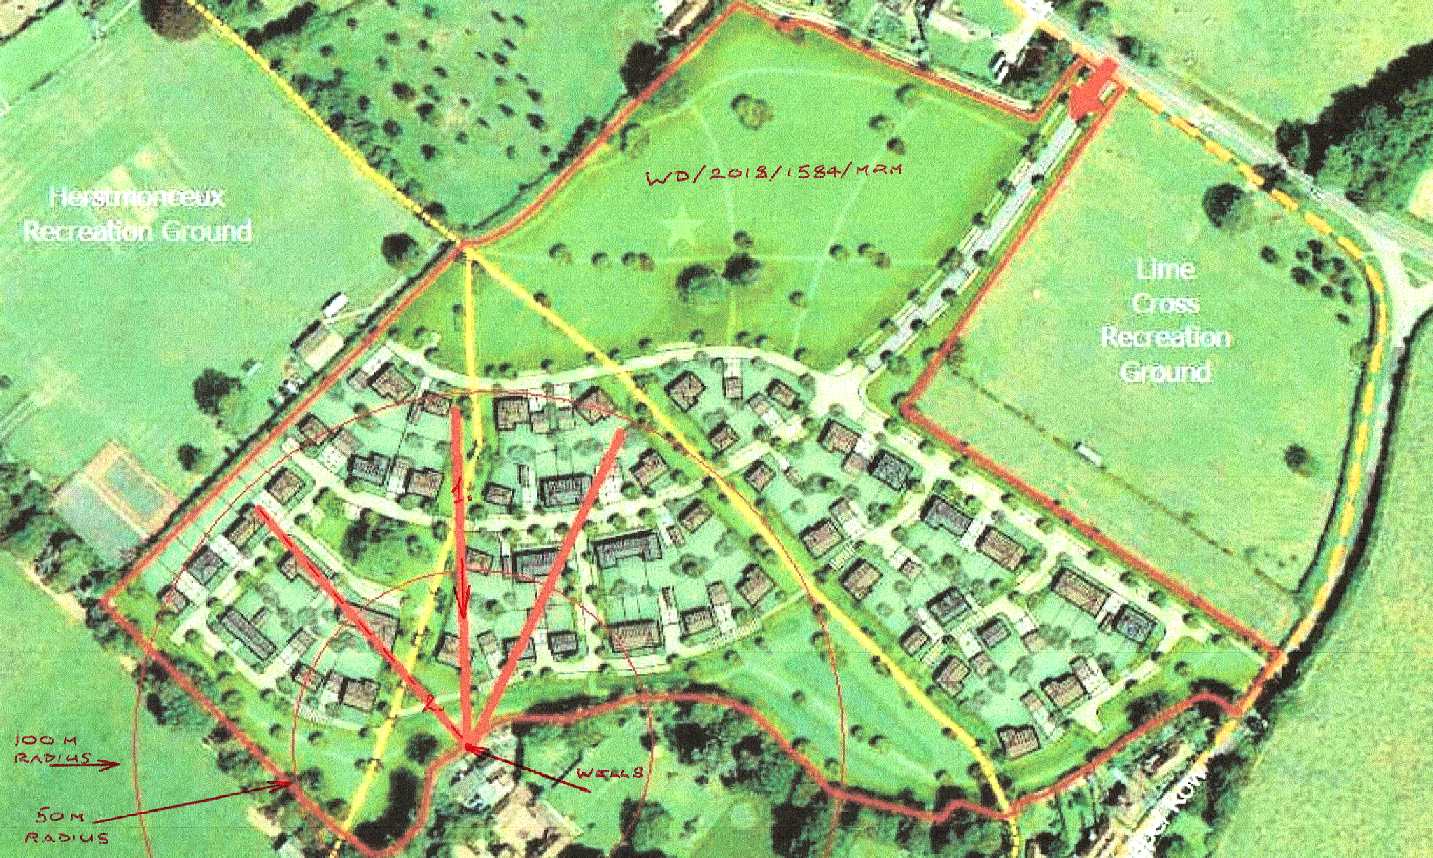 WD/2018/1584/MRM - Proposed plan of the housing development as submitted to the Area Plans South planning committee of Wealden District Council. 50 meter and 100 meter circles are shown on the map in thin red ink. It is submitted that the members and officers could be in no doubt at all, that the proposal would contaminate the ancient well, on land adjacent to Lime Park. There were some 35 conditions attaching, not one of which offered or even identified binding protections for the water rights, that they knew about from pictures and written objections from adjacent occupiers.